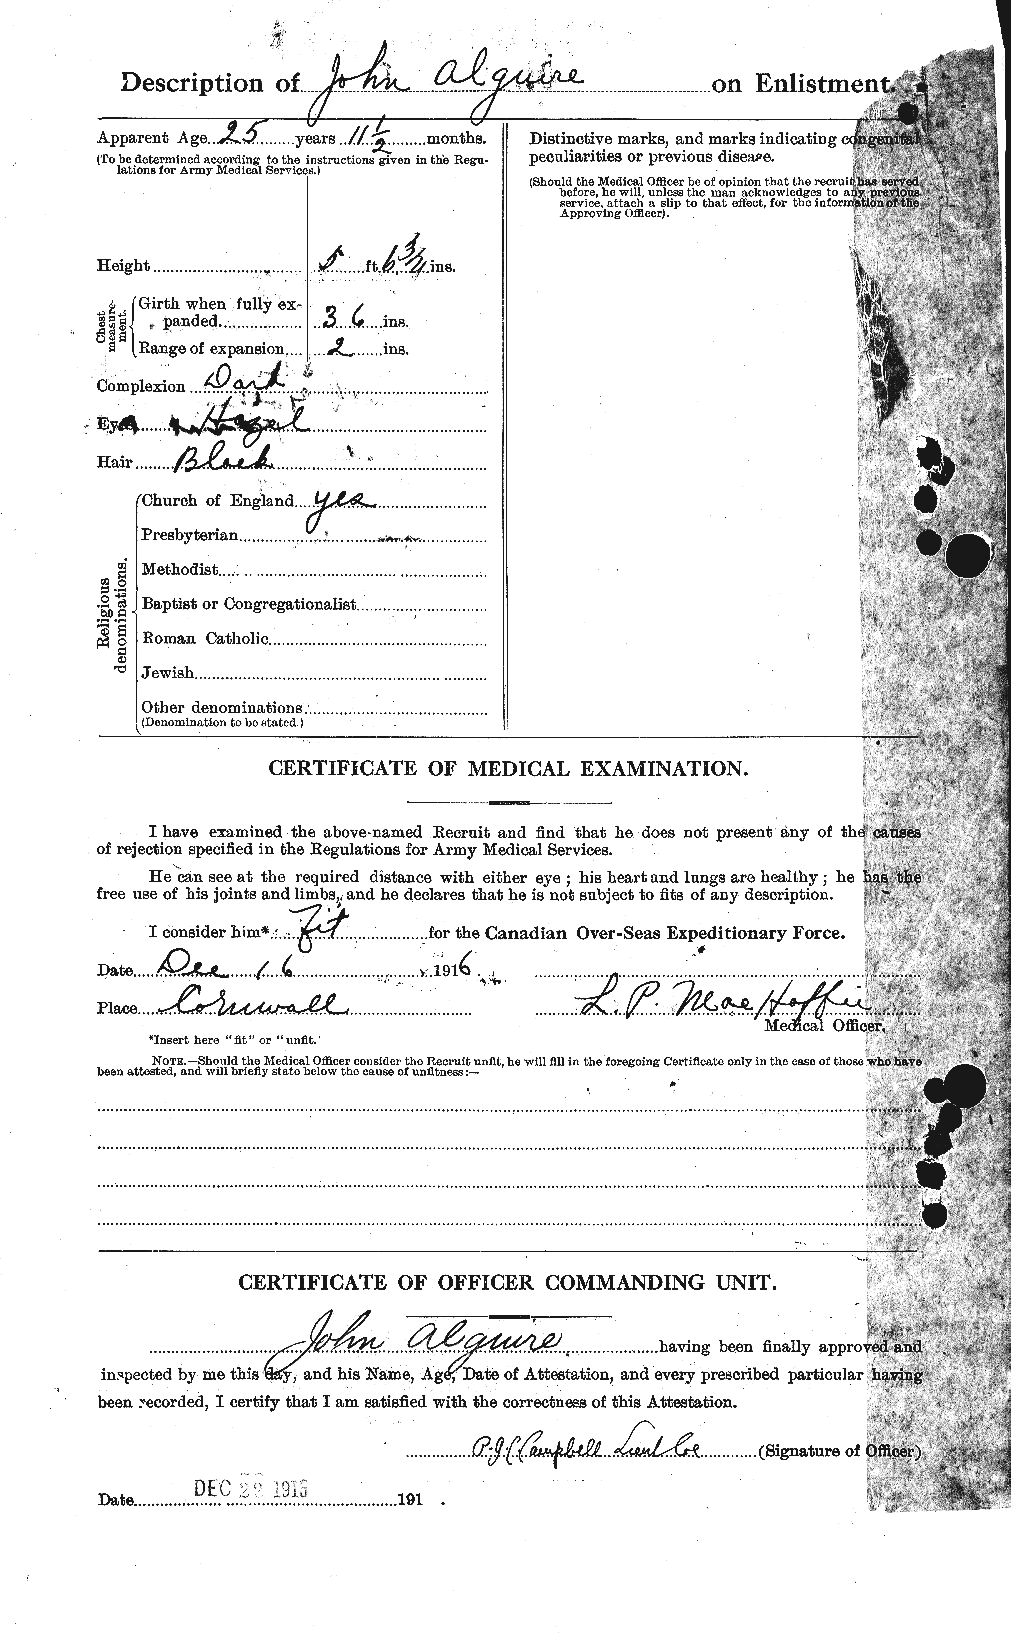 Personnel Records of the First World War - CEF 205081b